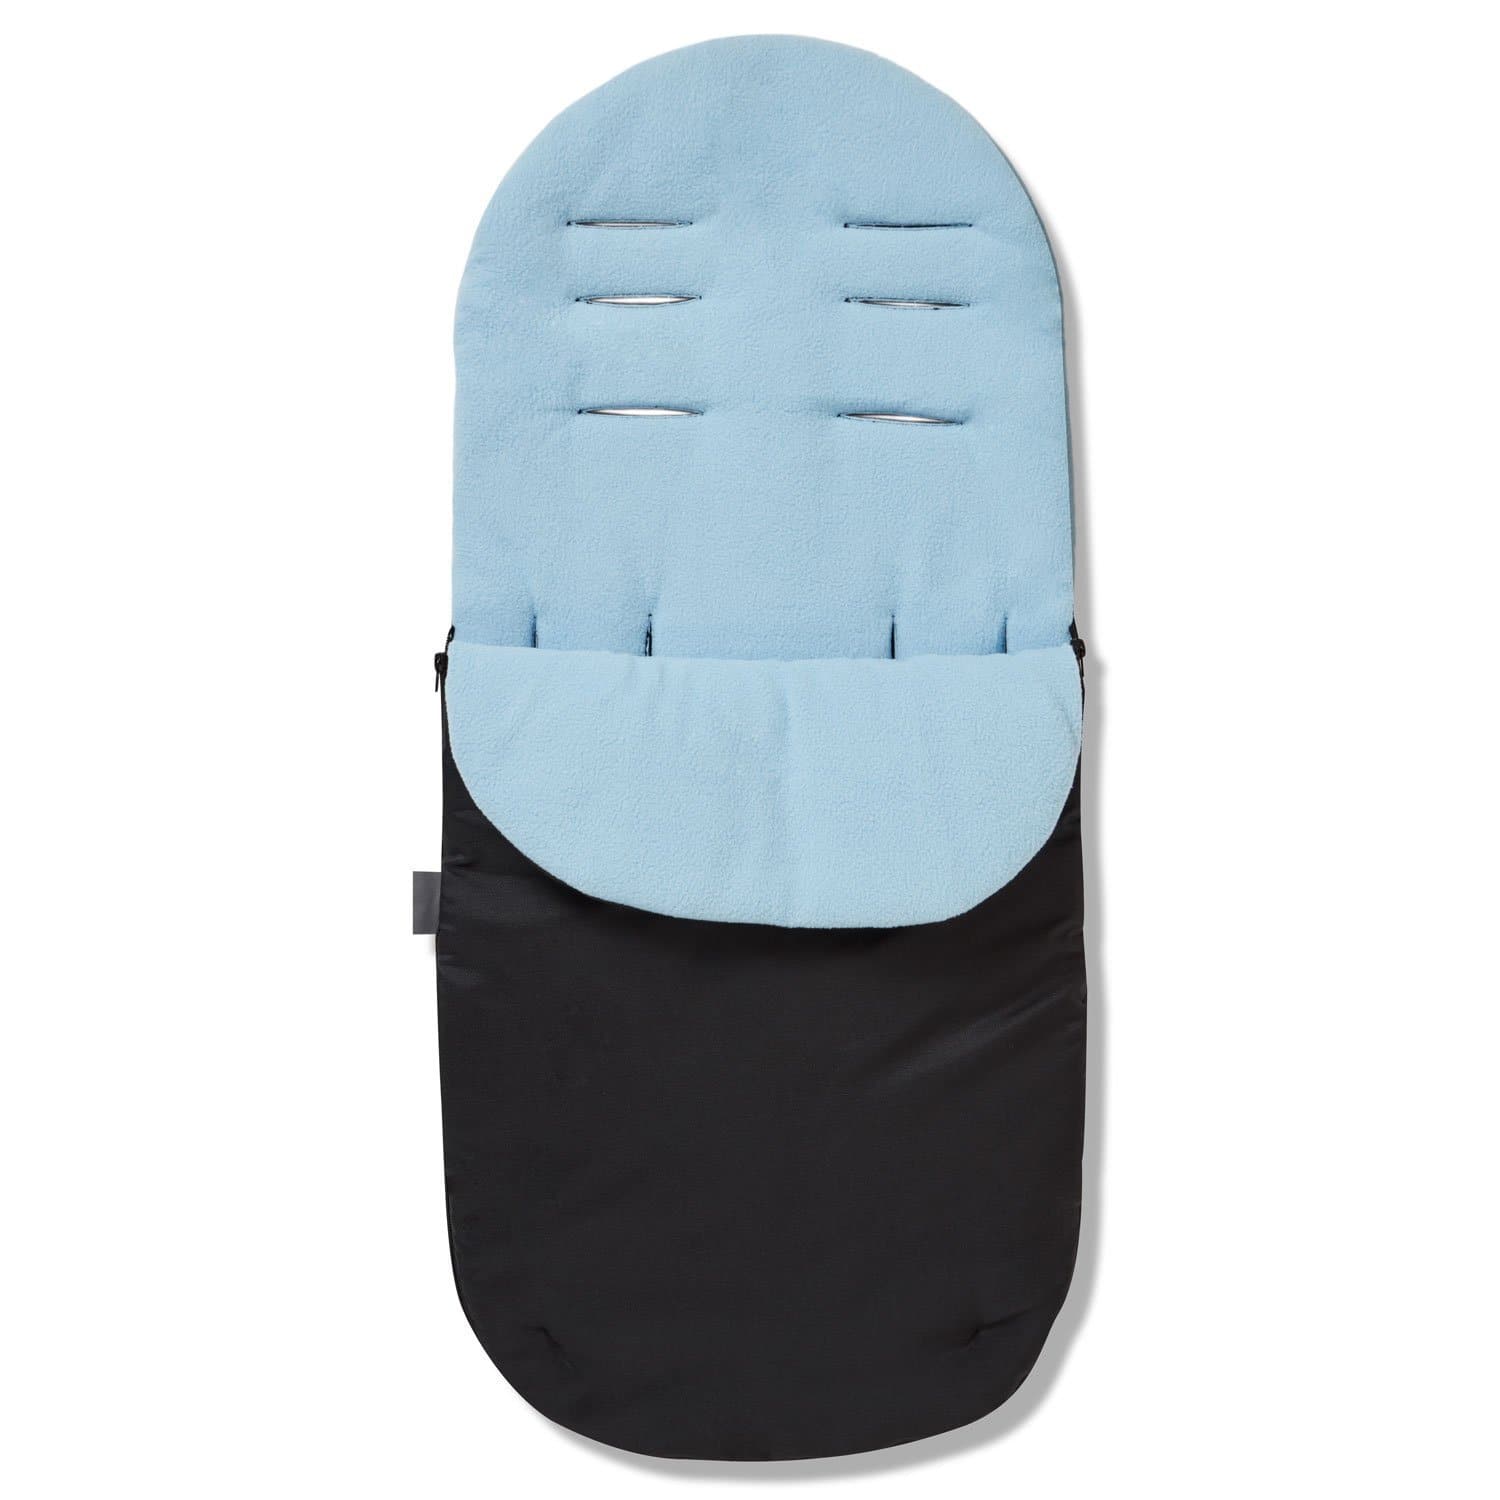 Footmuff / Cosy Toes Compatible with Cybex - For Your Little One